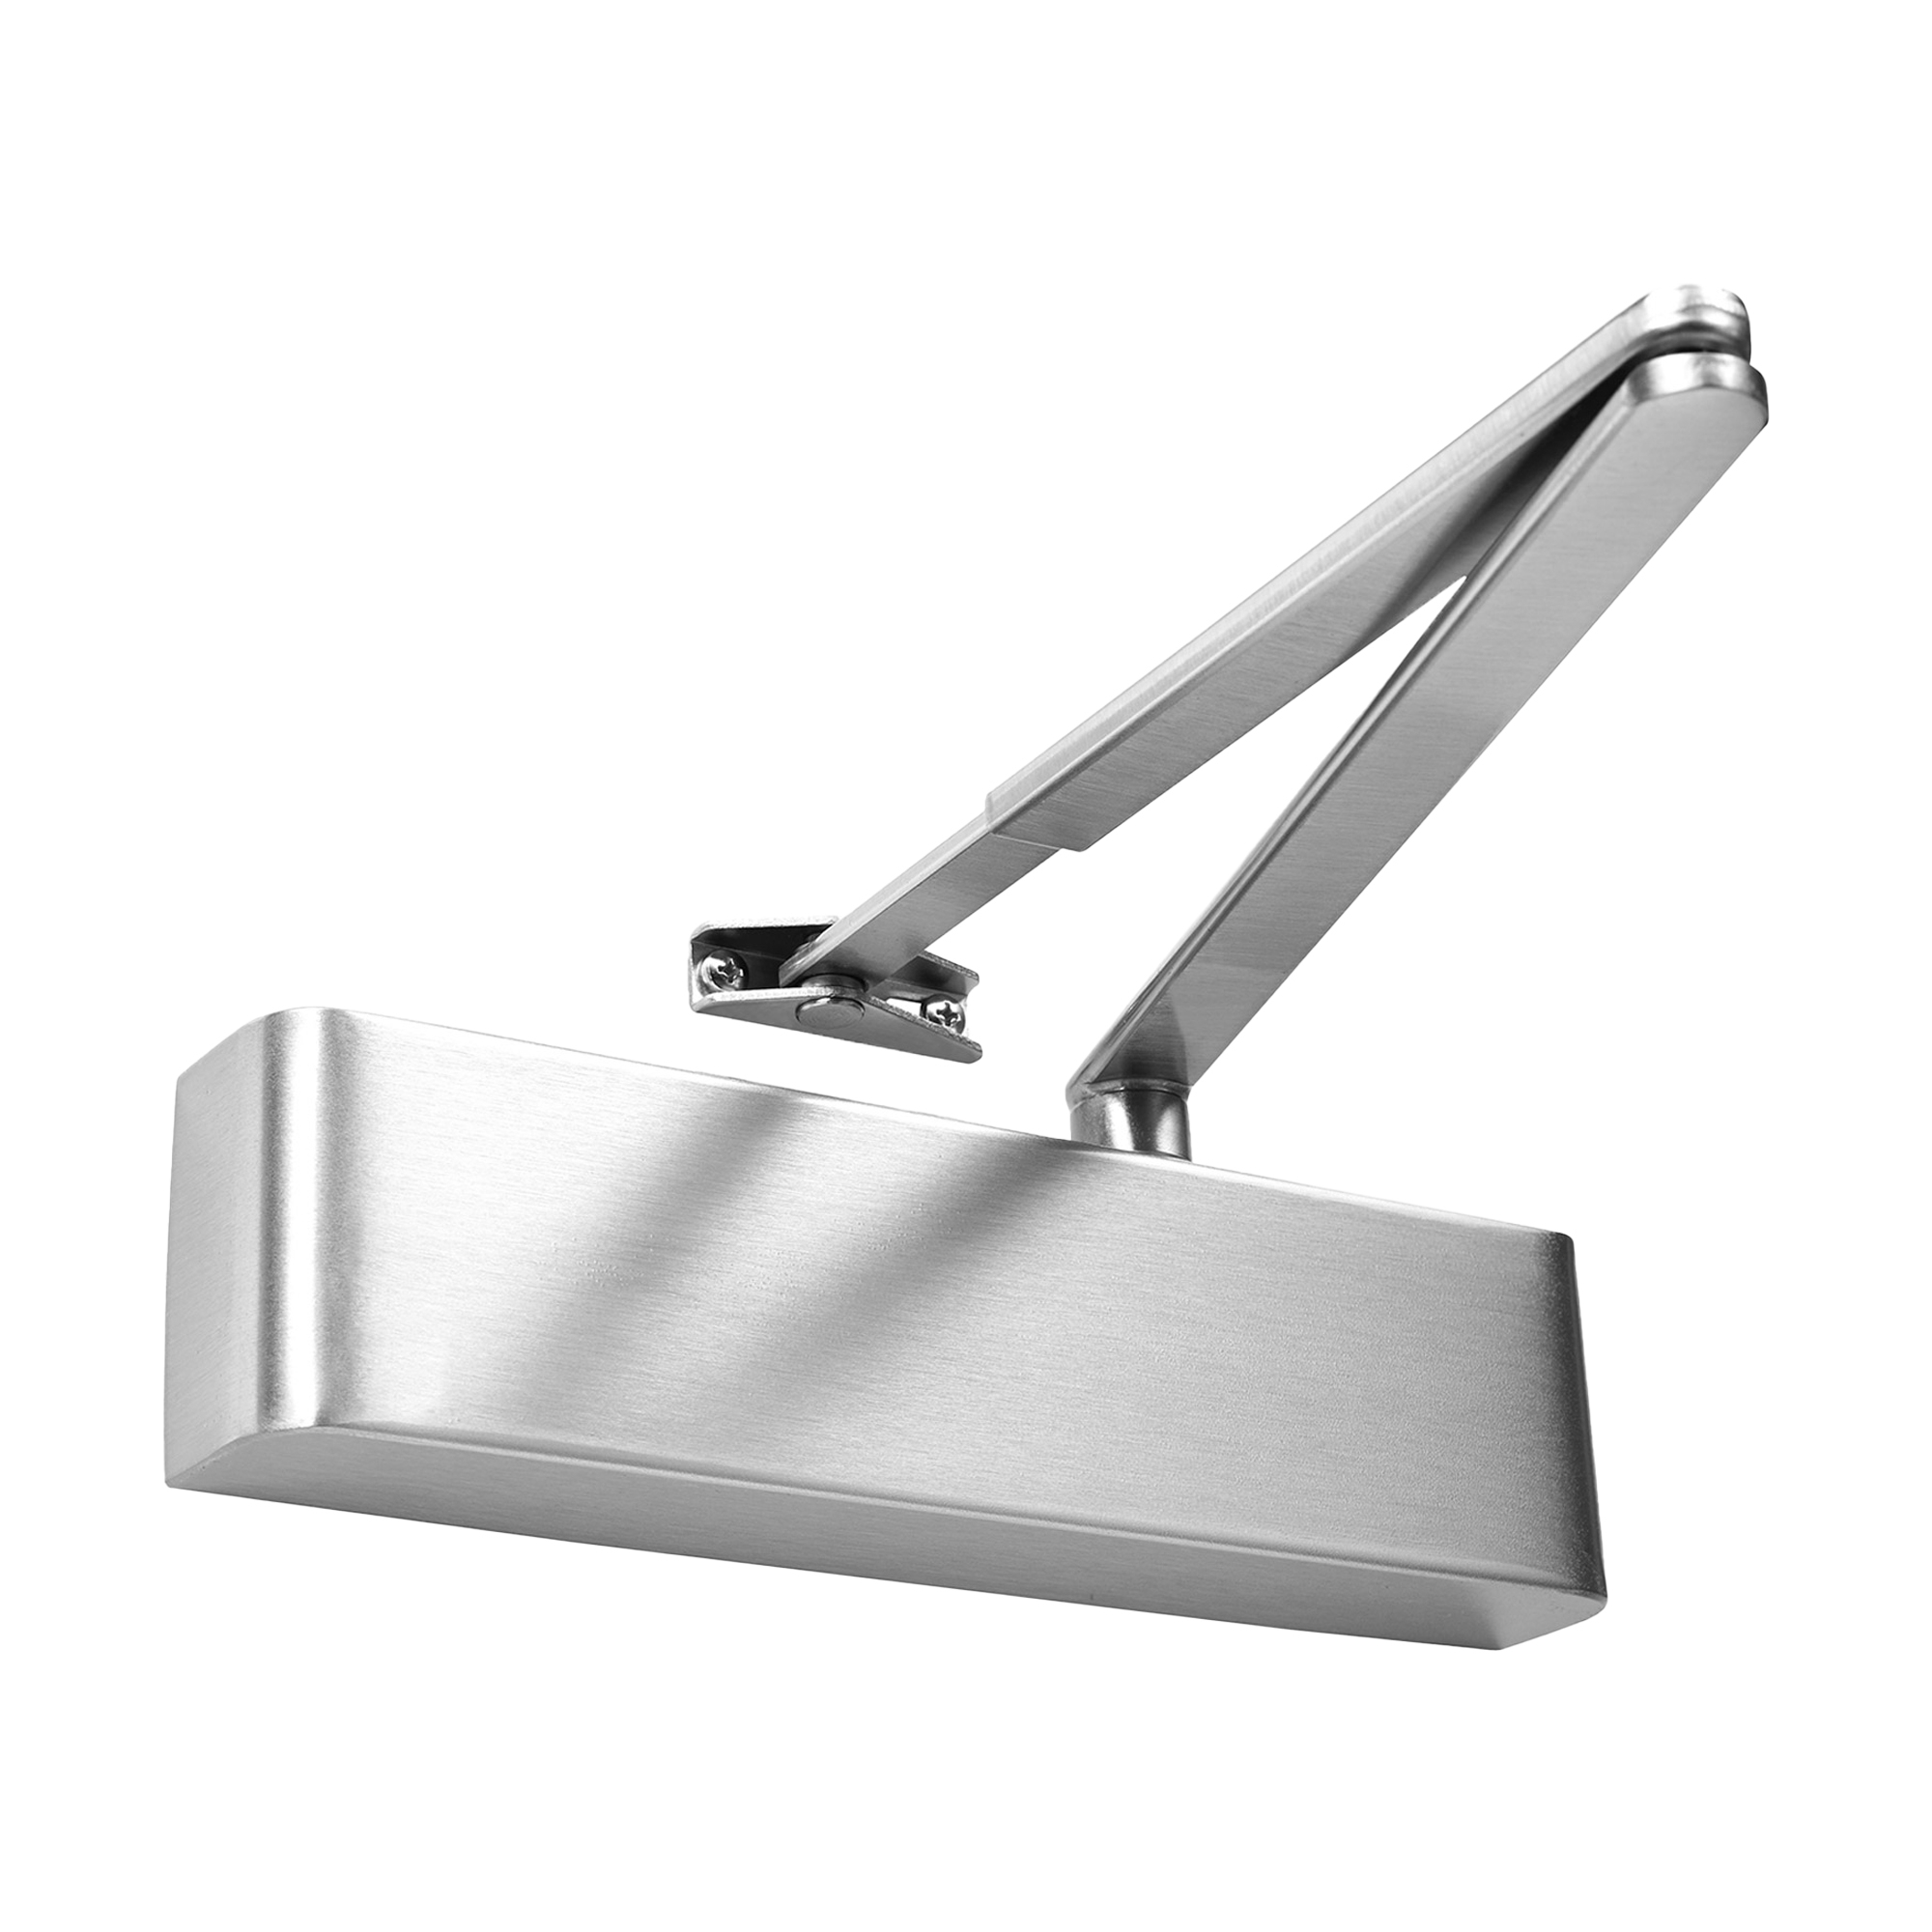 Door Closer 2-5 H.O Pull Side + Cover